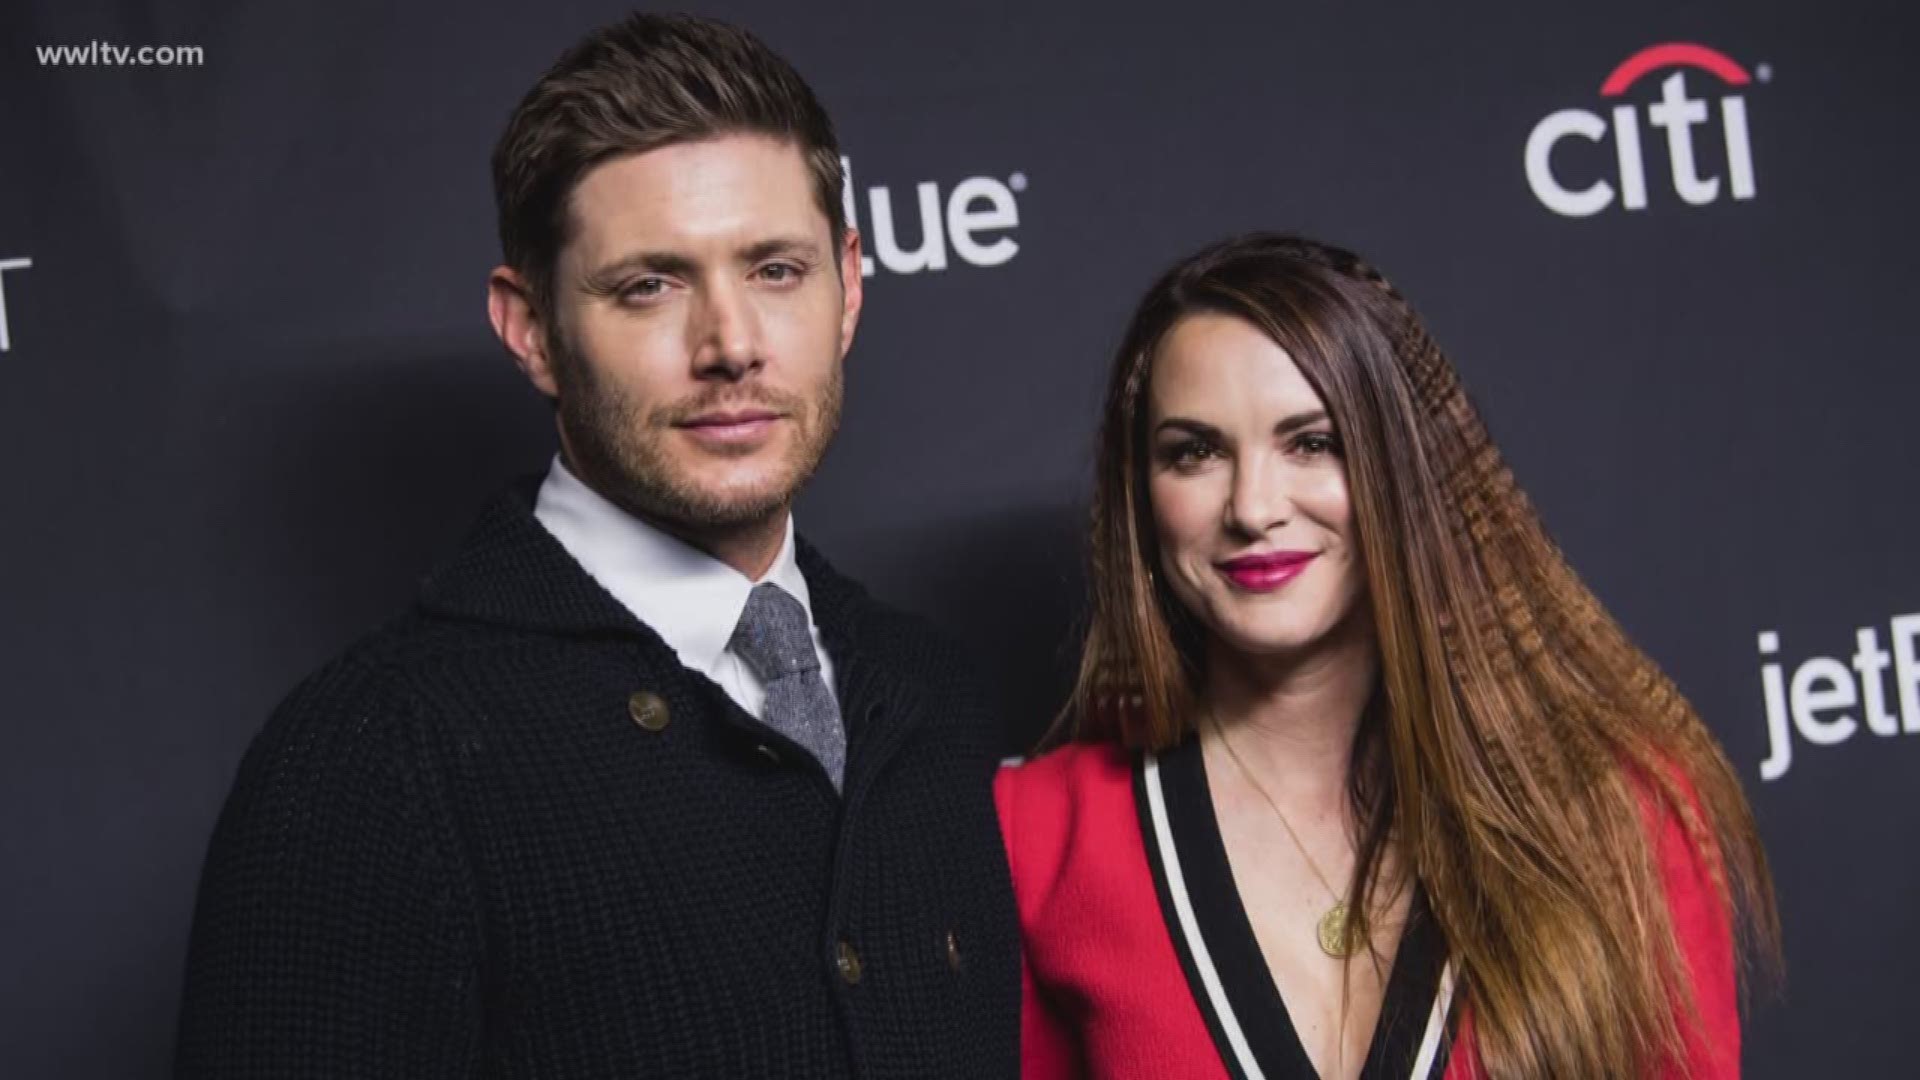 Jensen Ackles, actor, director and star of the horror fantasy series “Supernatural,” will reign as Bacchus LI when the super krewe rolls on March 3.